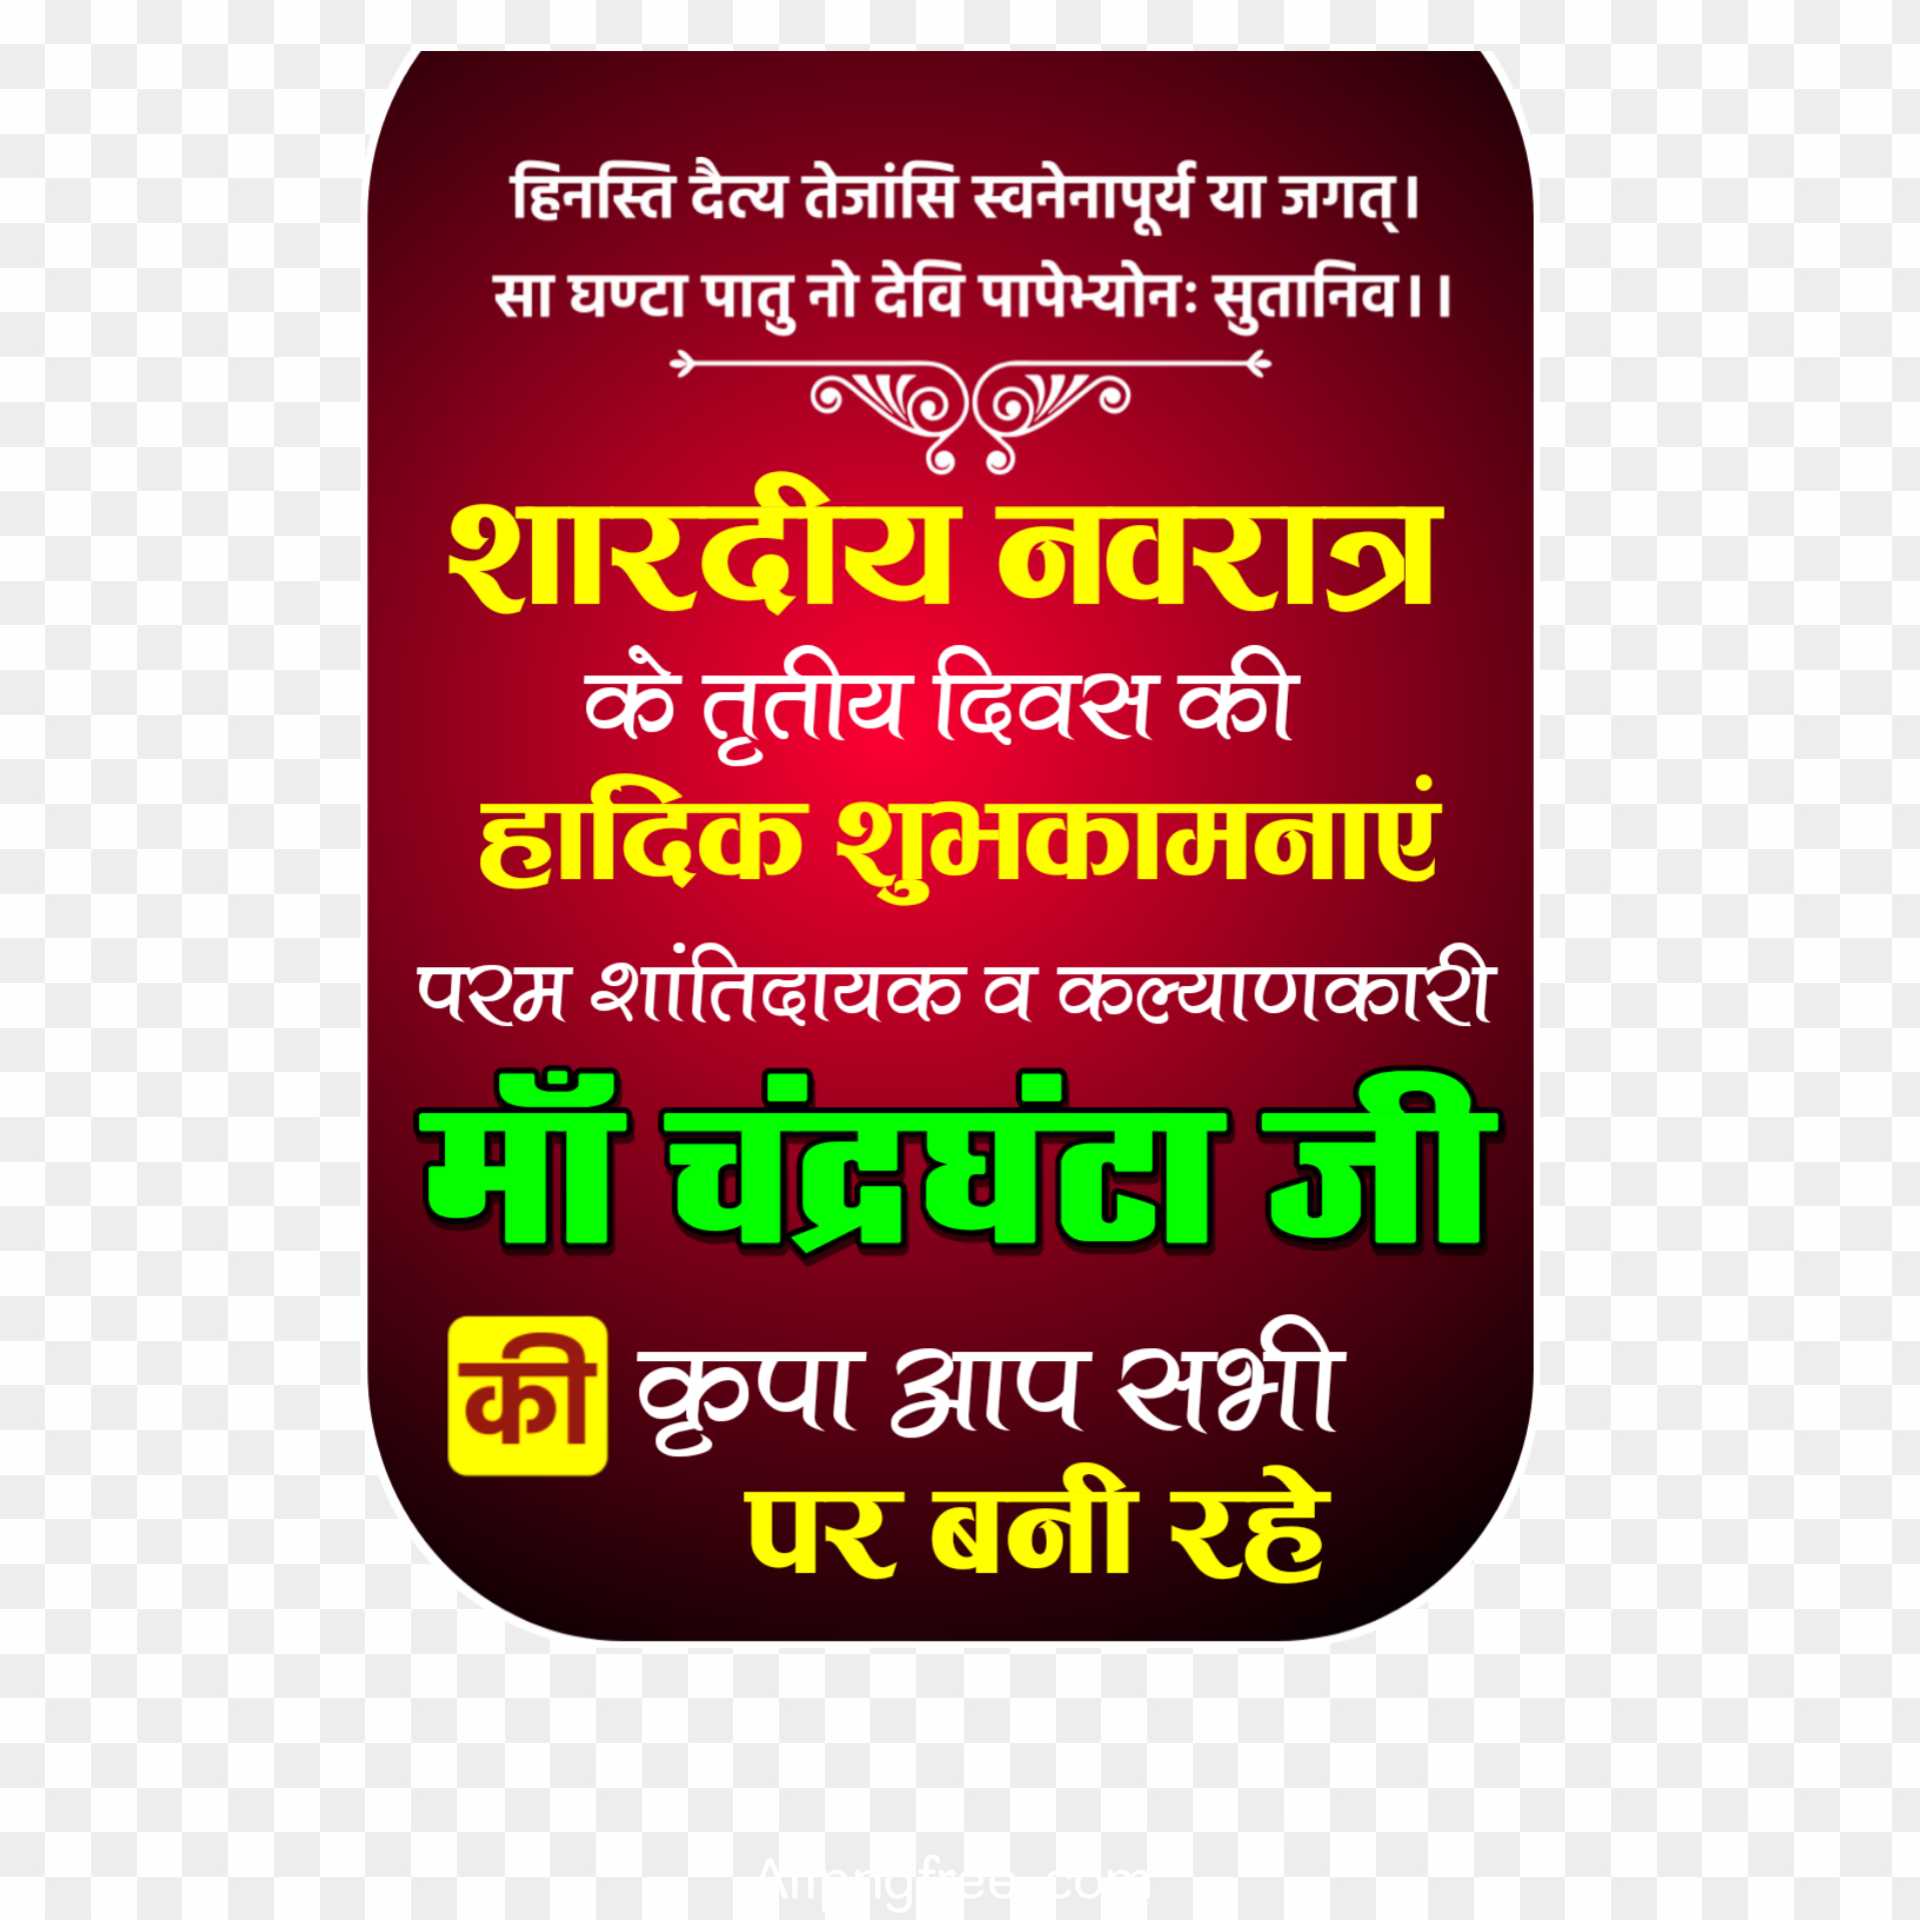 Maa Chandraghanta Navratri banner editing png images download - transparent  background PNG cliparts free download | AllPNGFree